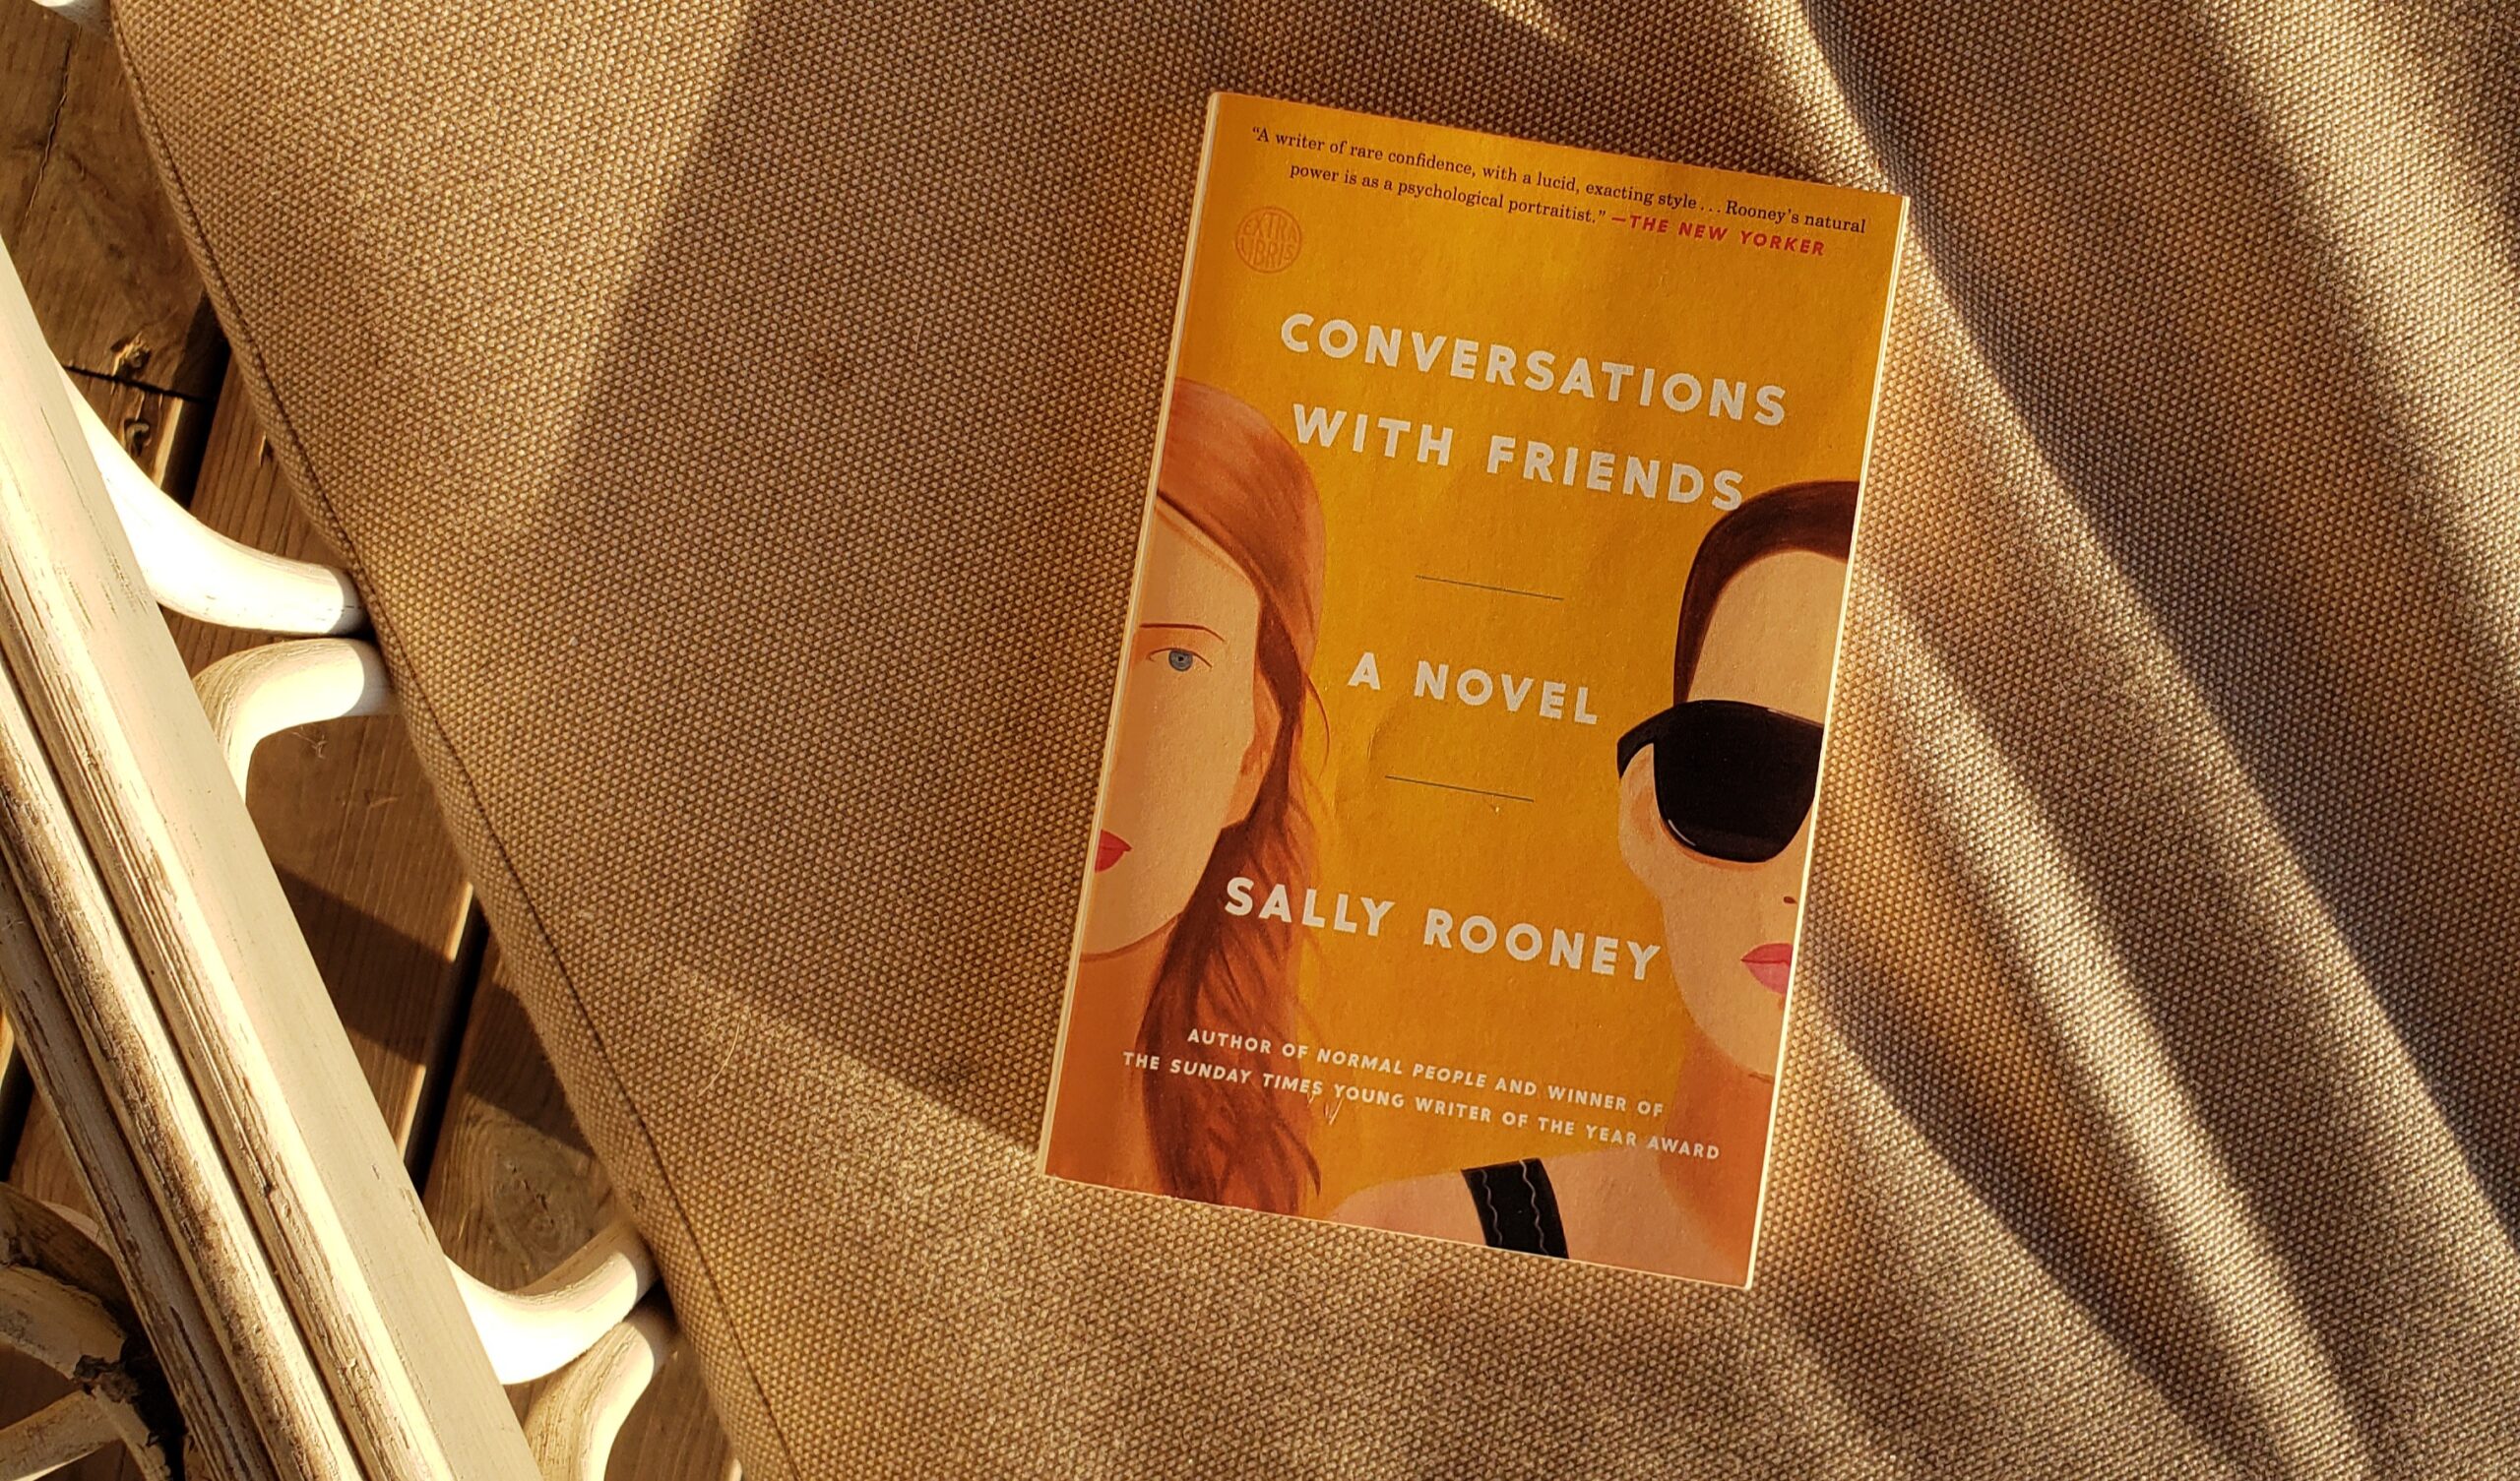 85: Conversations With Friends by Sally Rooney